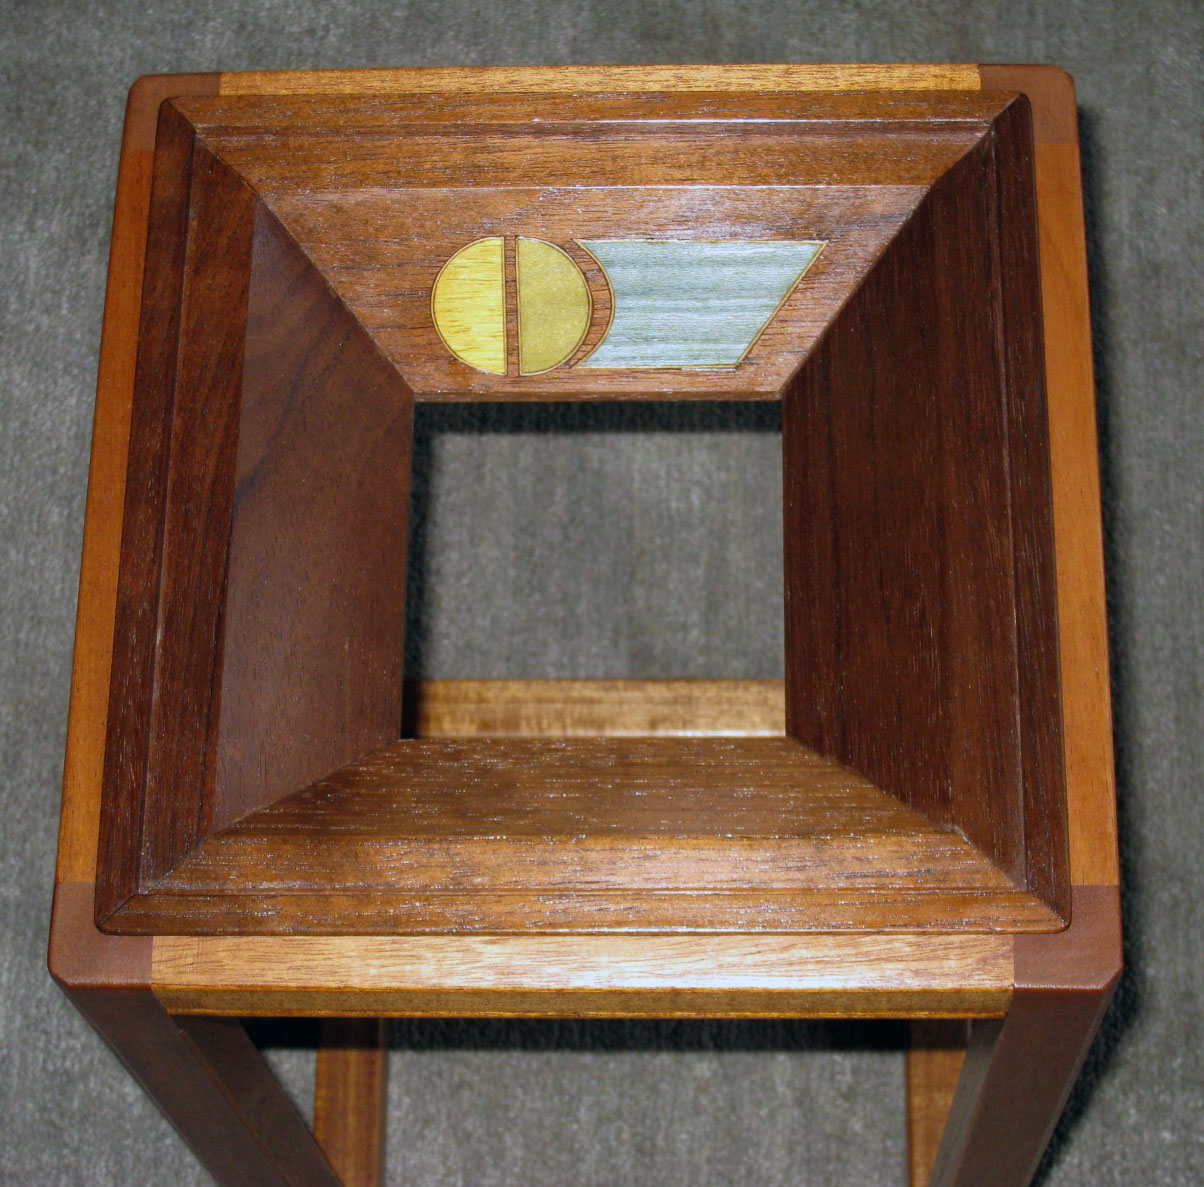 Small Table (glass top removed).  Materials: mahogany and Peruvian walnut.   Colored wood-veneer inlays